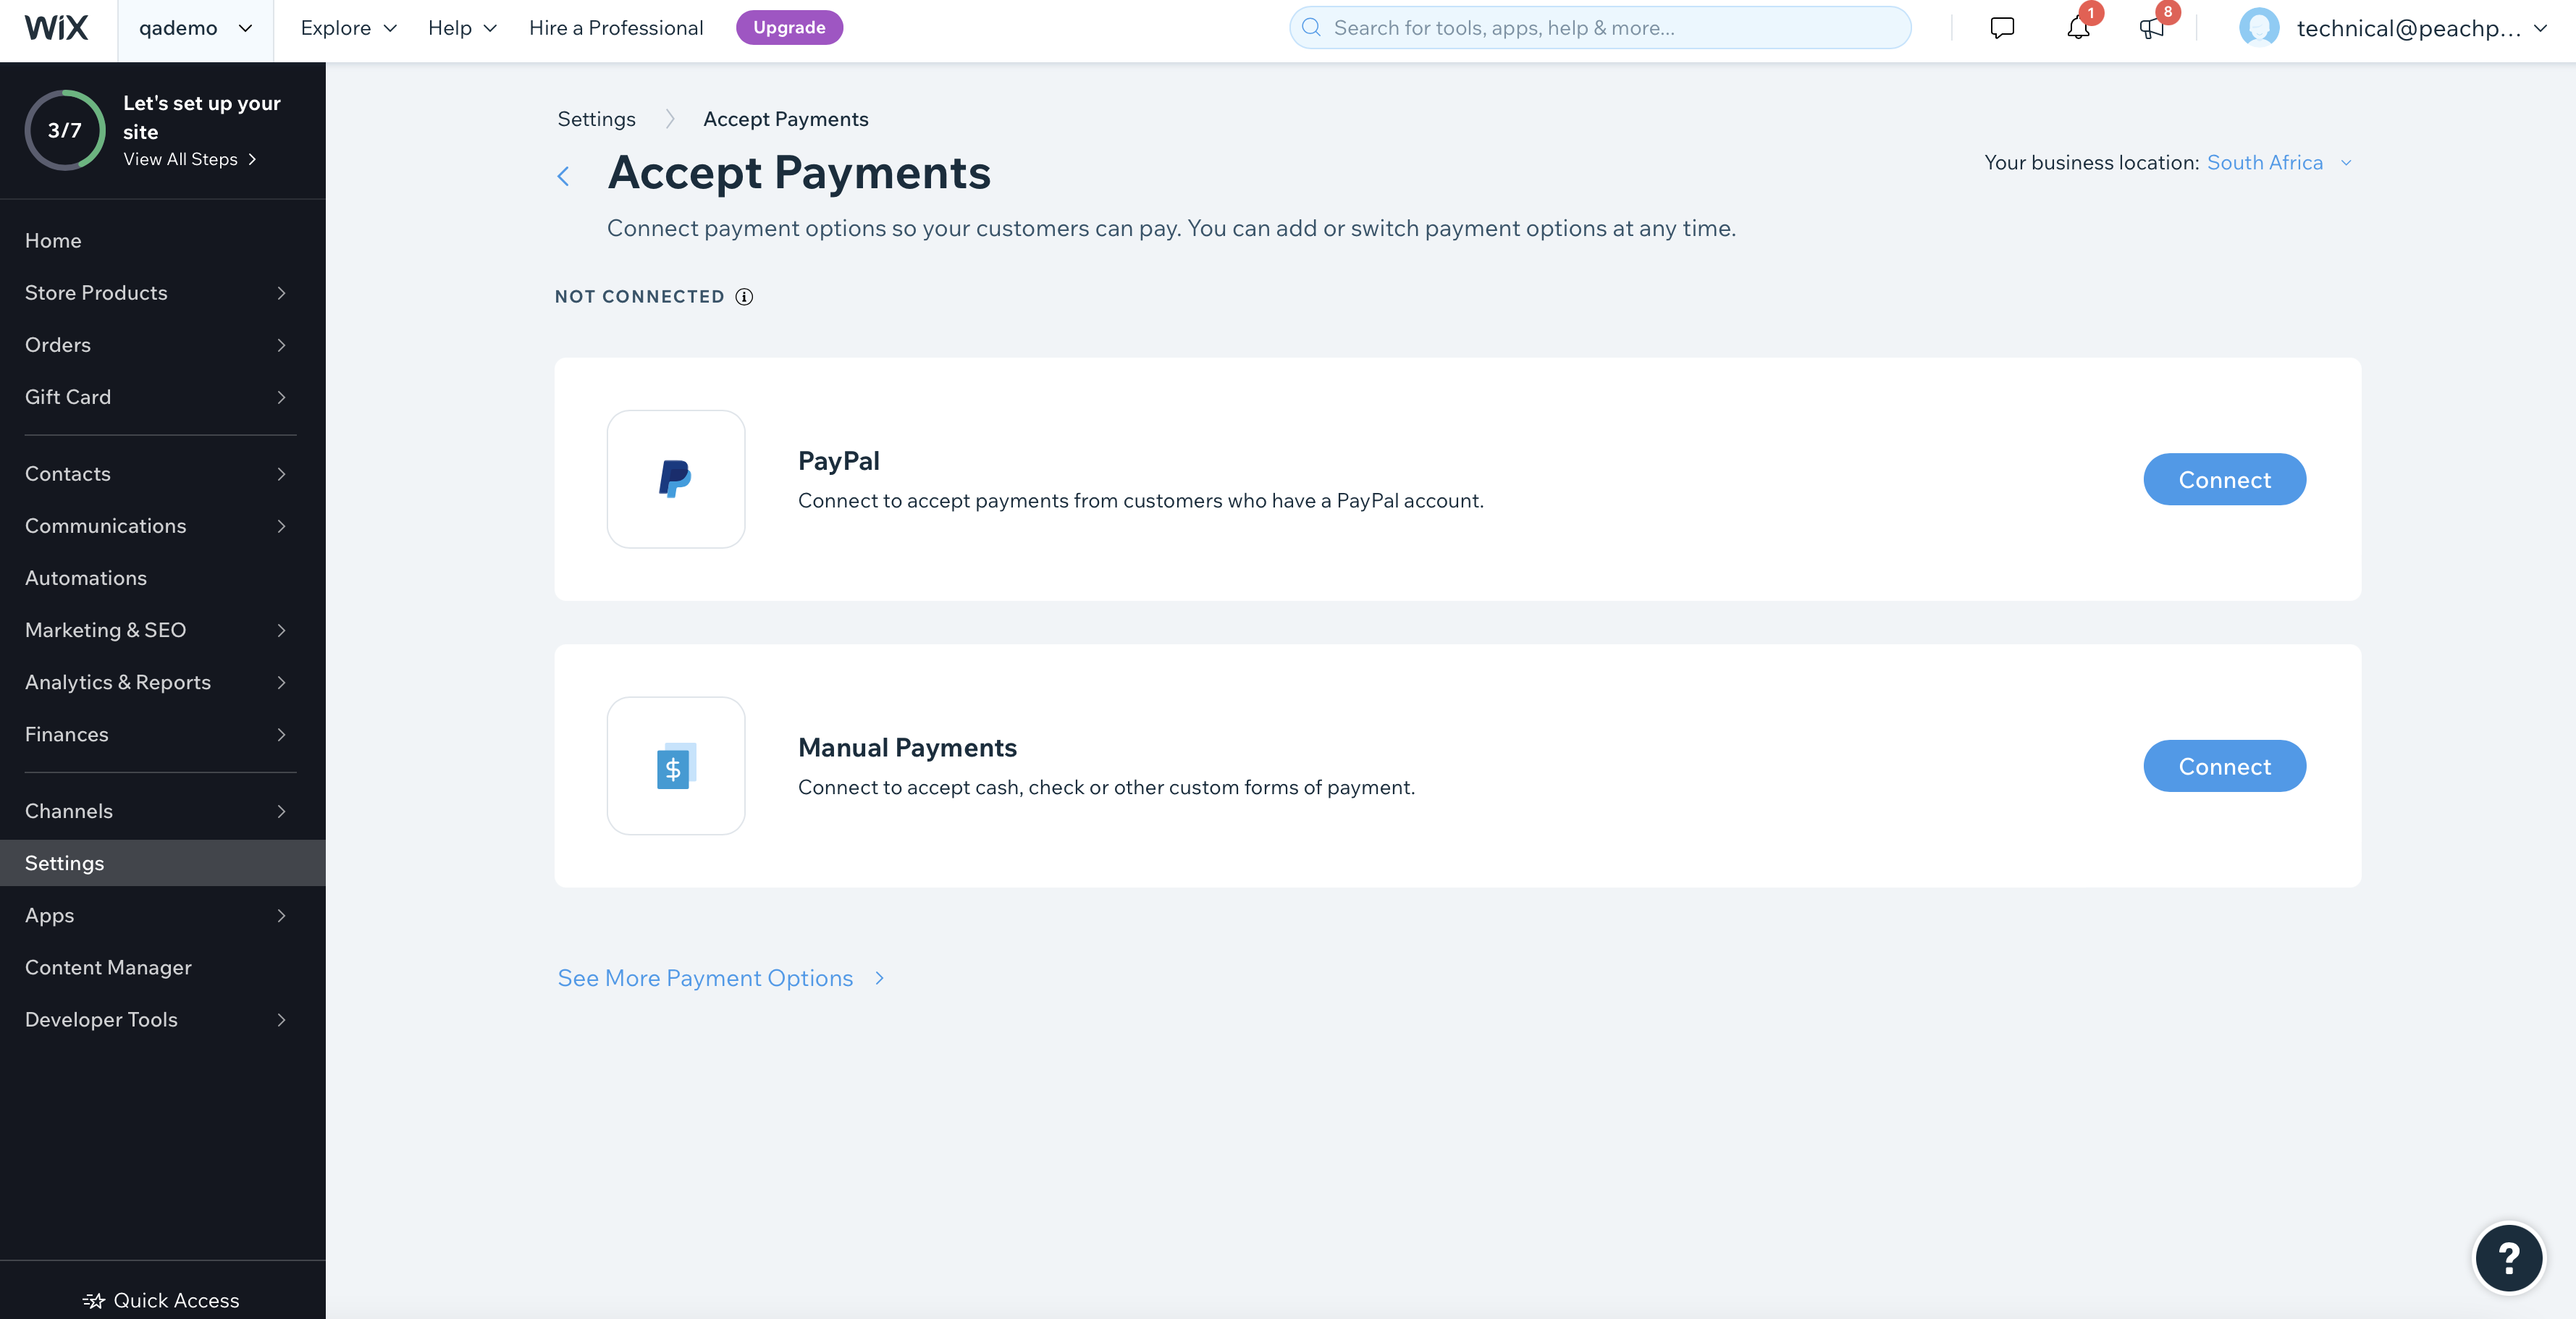 Accept Payments page